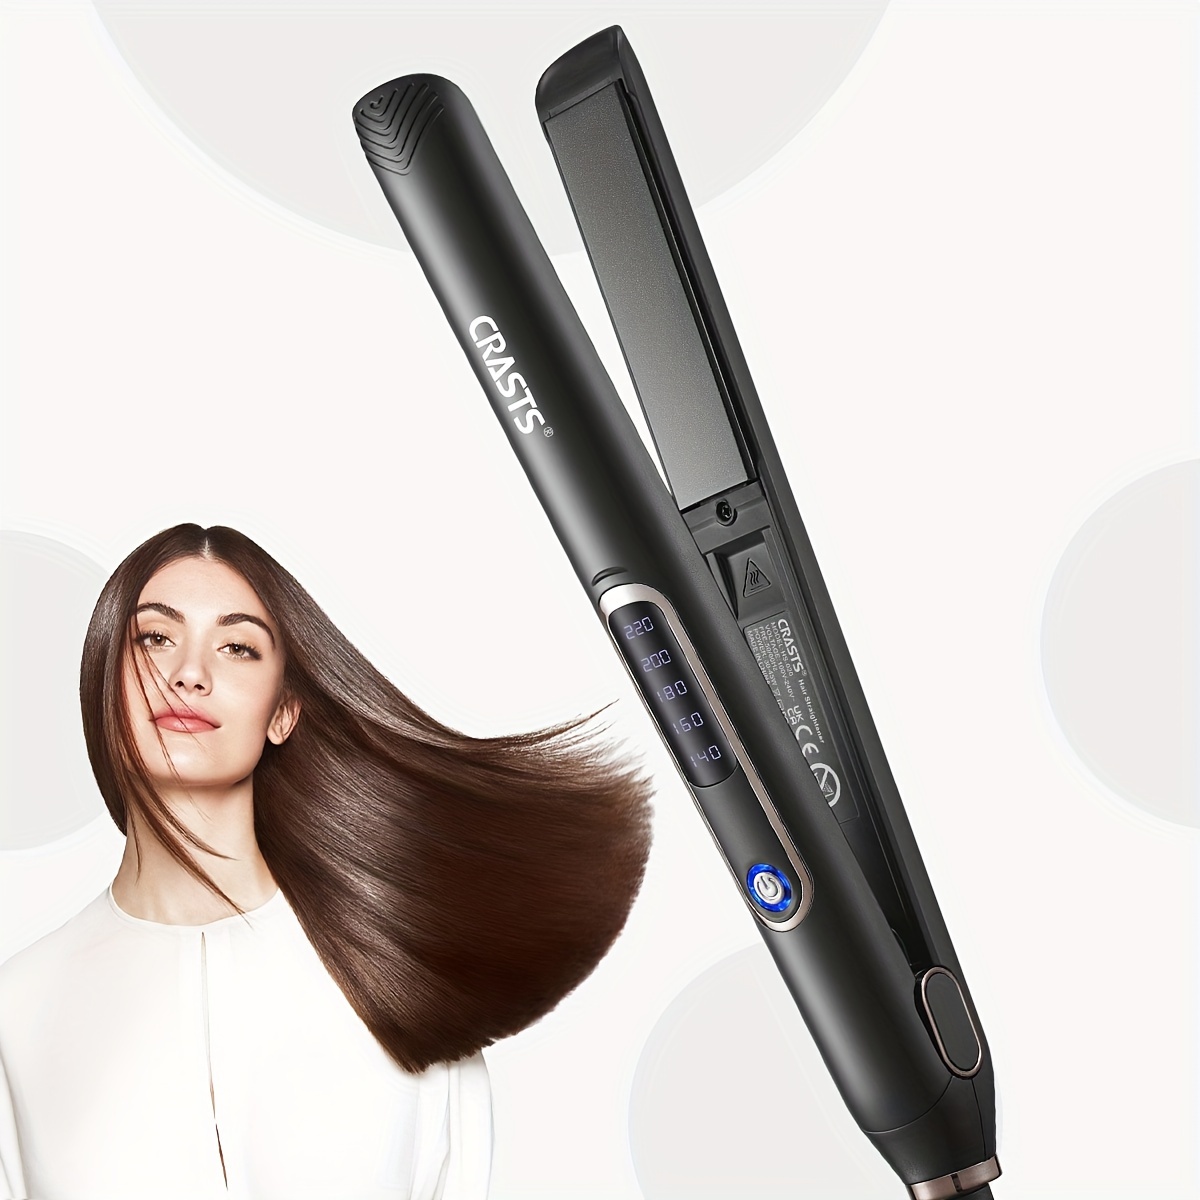 

Professional Hair Straightener And Curler 2 In 1, With Lcd Temperature Display, Gifts For Women, Mother's Day Gift